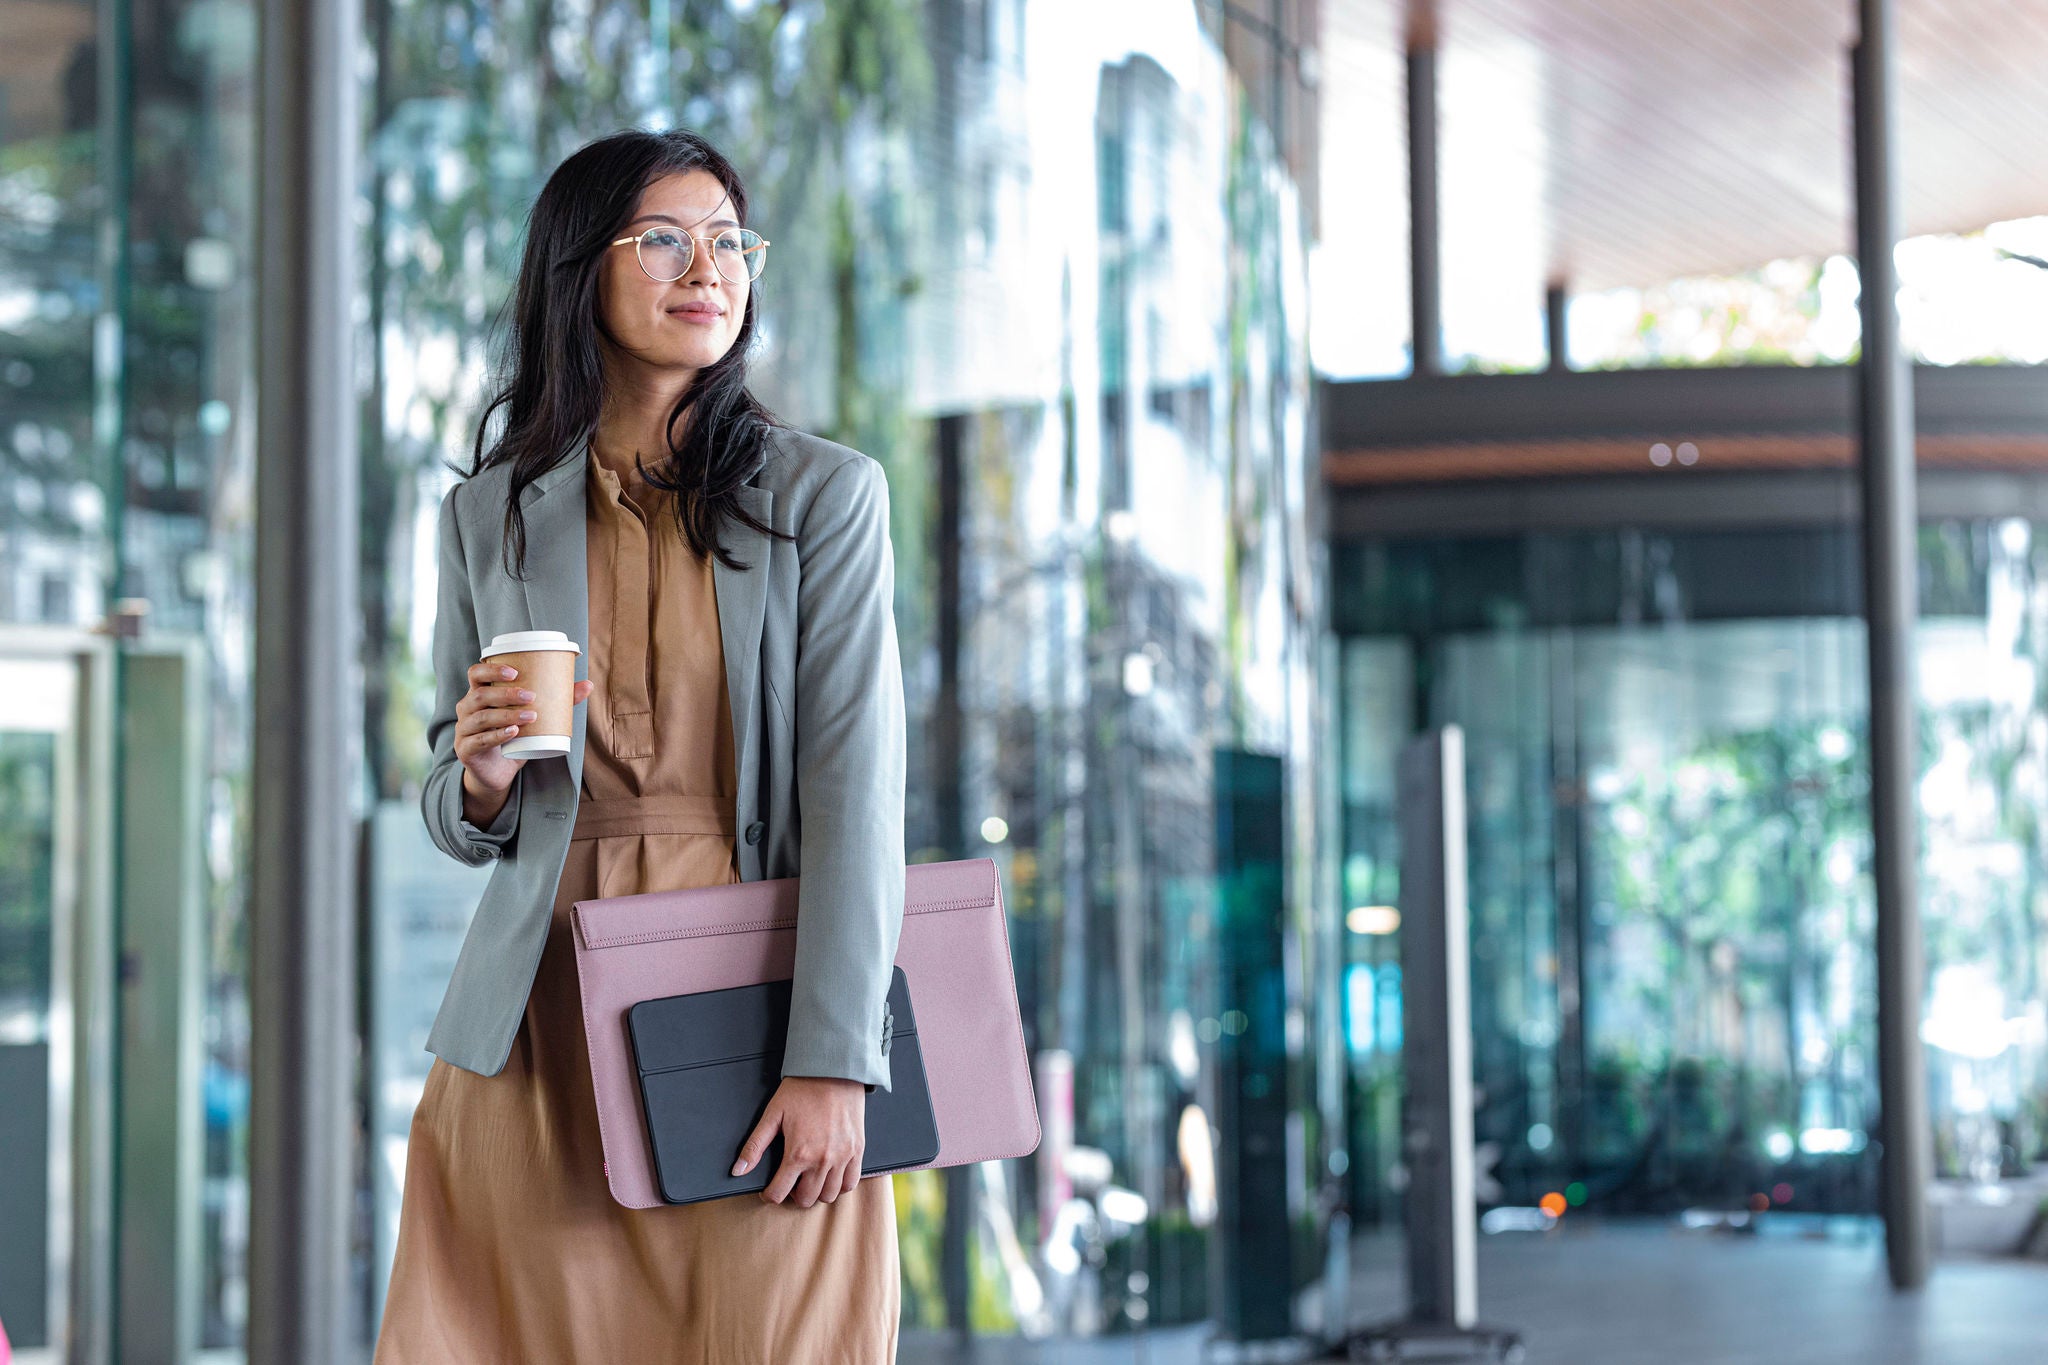 Outdoor shot of a smiling Asian businesswoman holding coffee and files on the street.